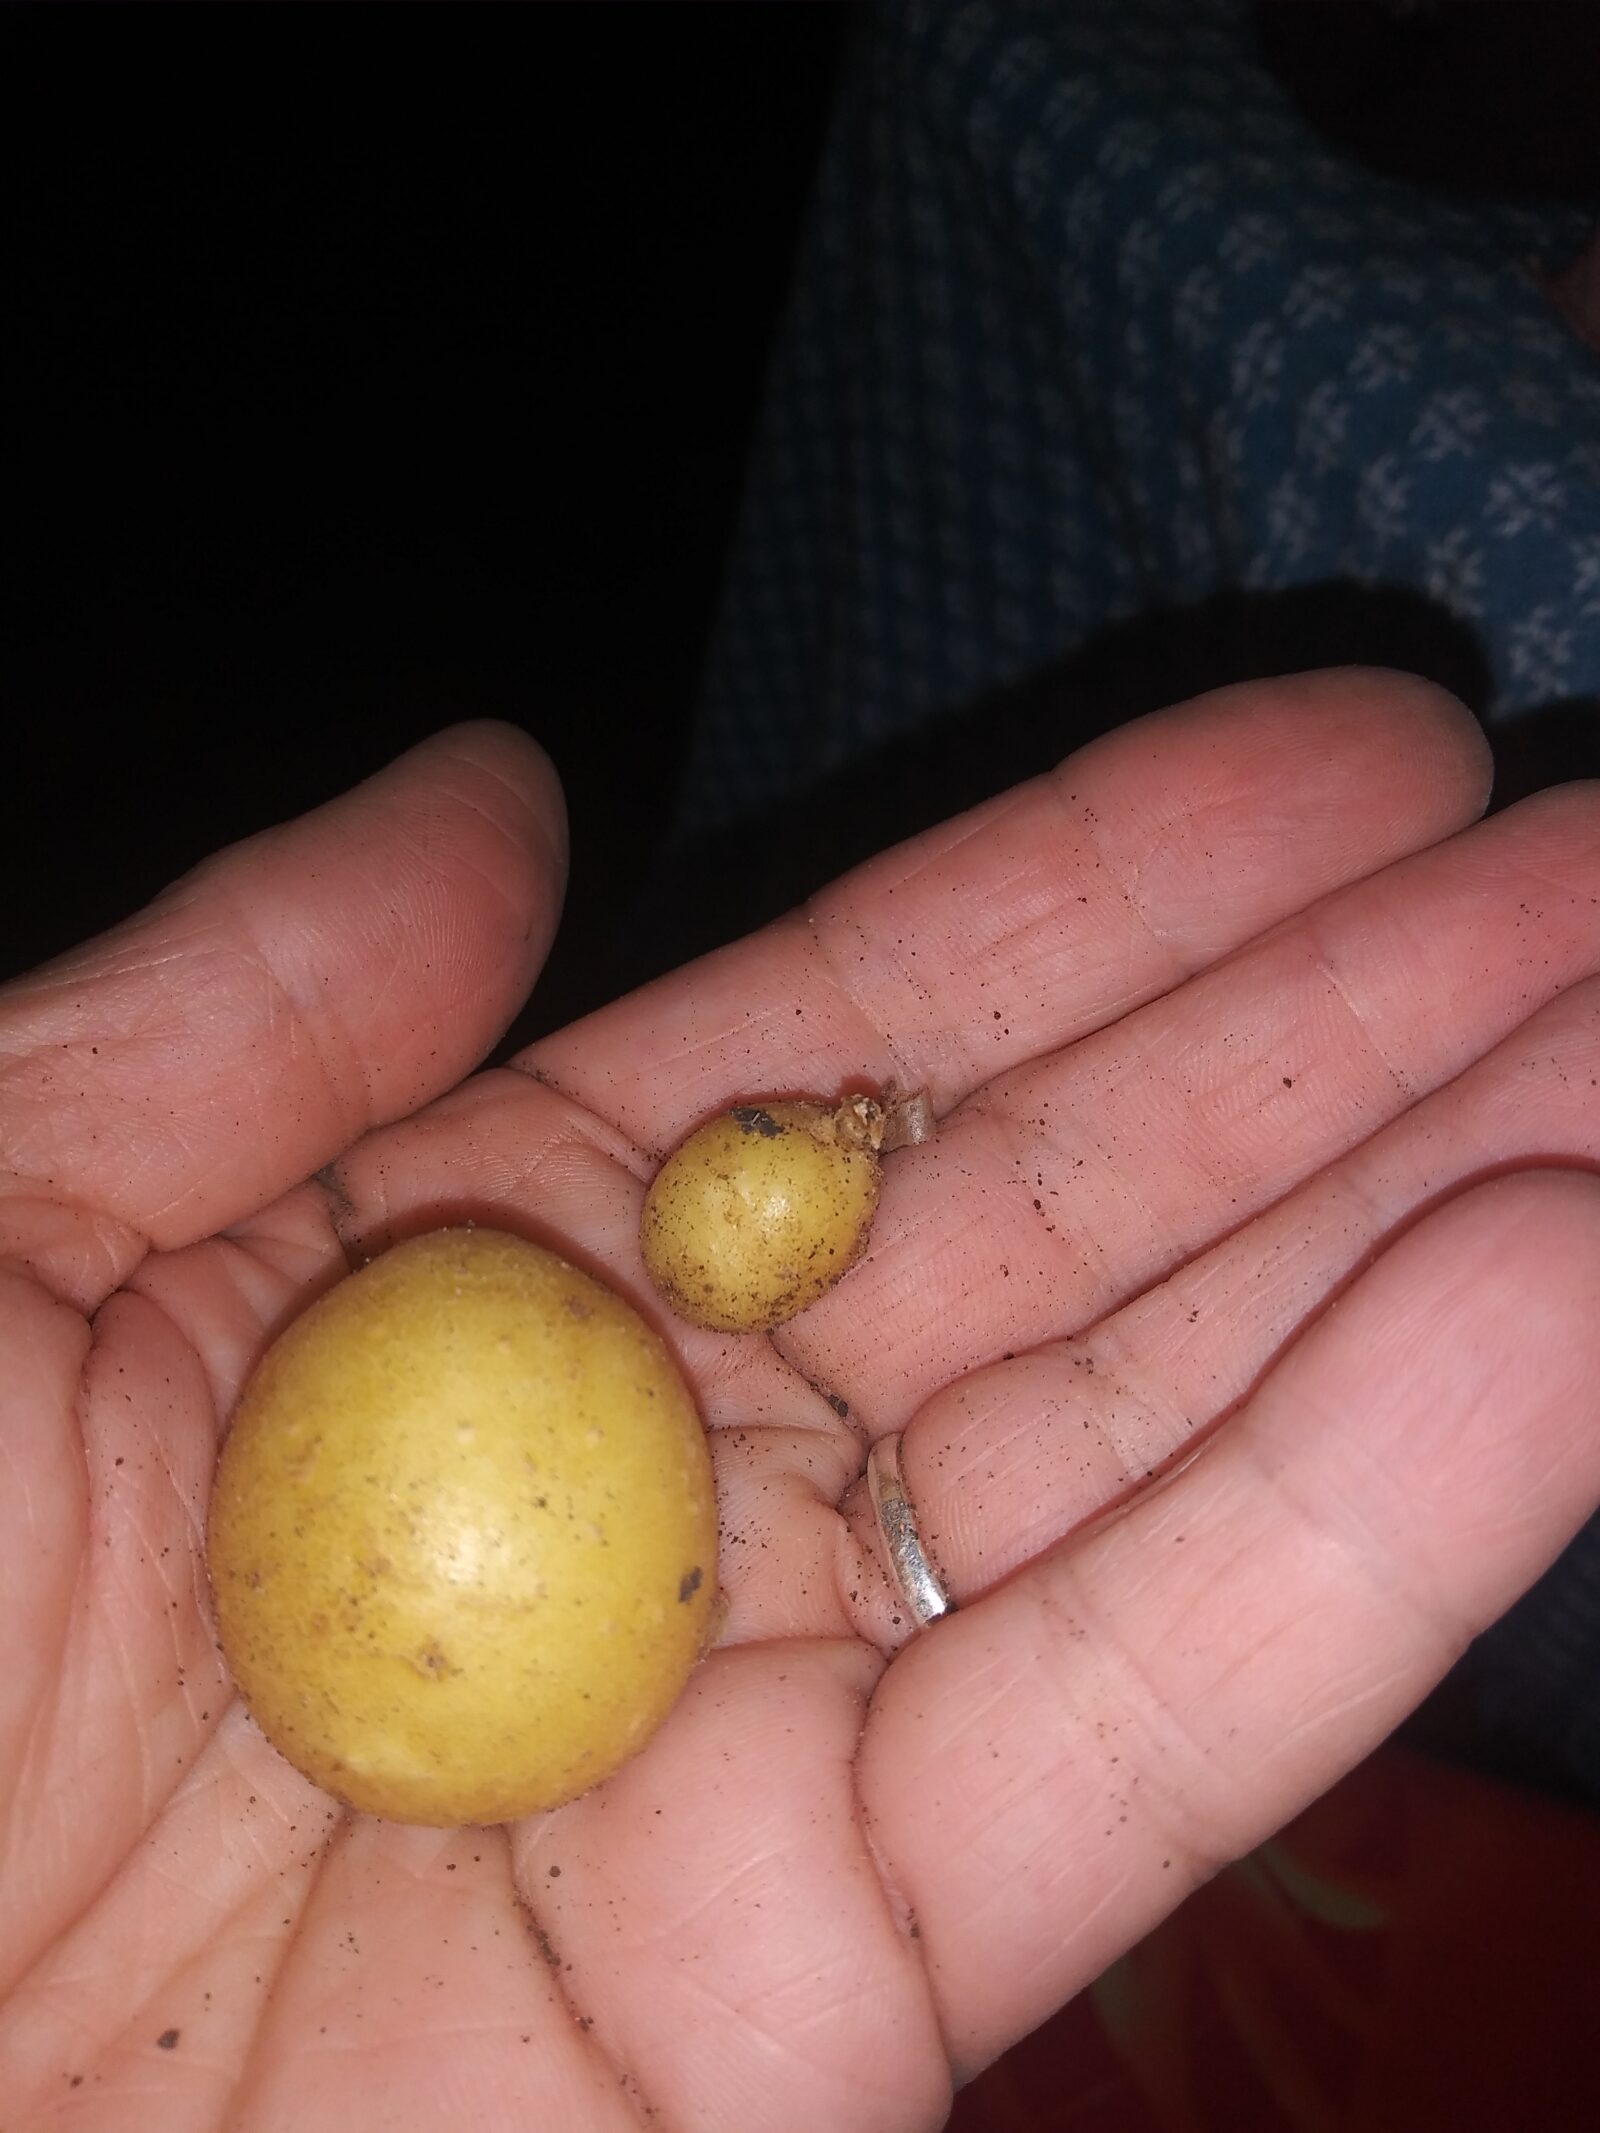 Two small potatoes in the palm of a person's hand